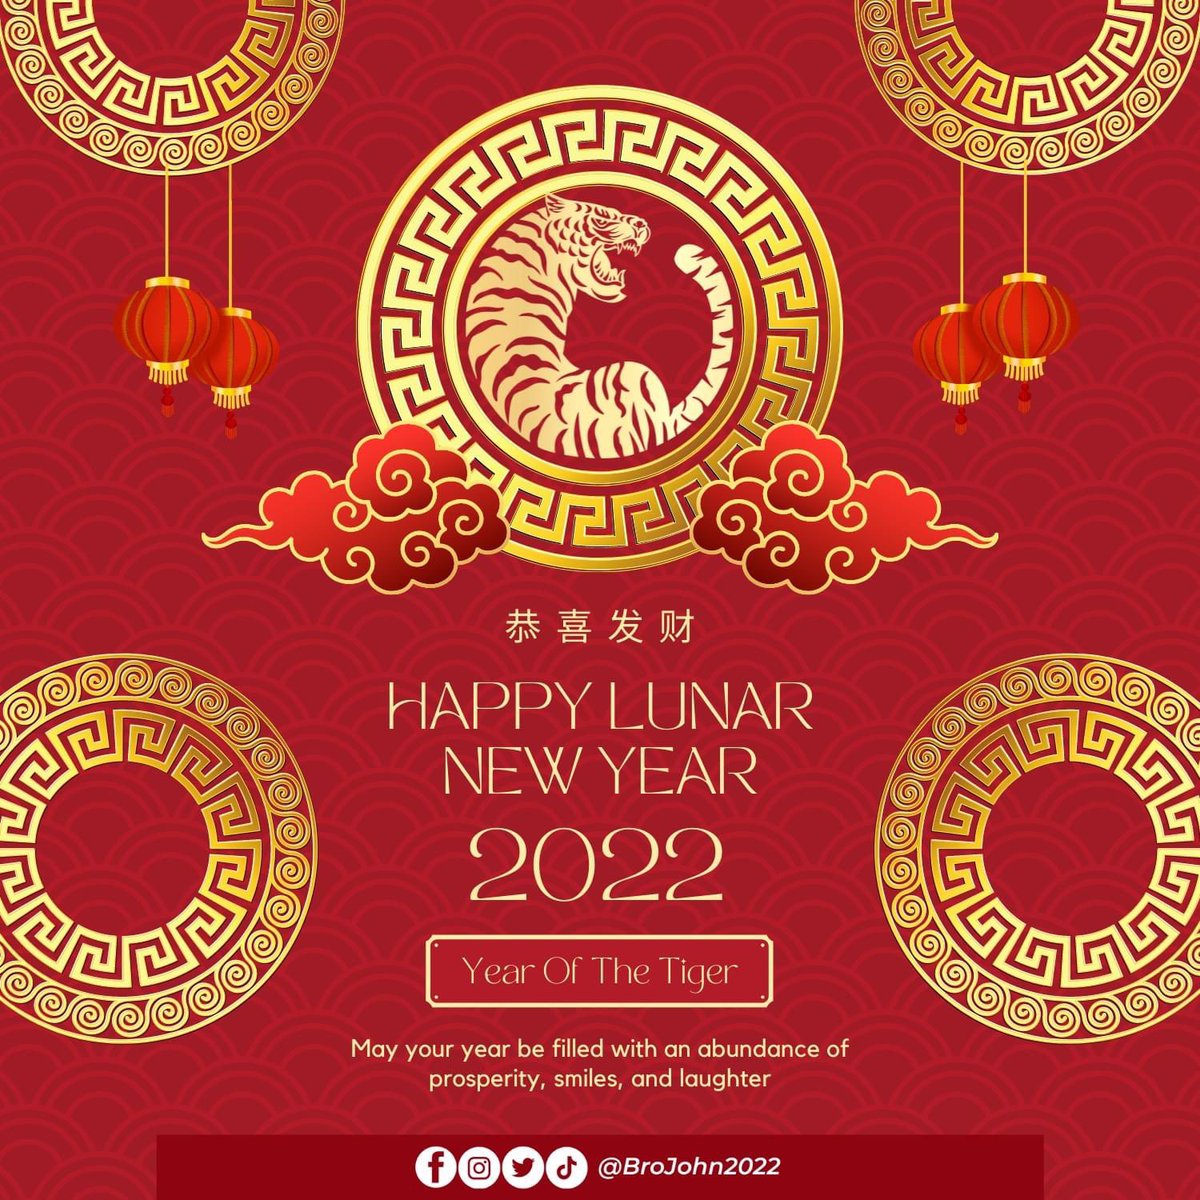 Happy Chinese New Year or Lunar New Year to everyone! May we all have a safe and joyous celebration of this occasion. 

#YearoftheWaterTiger